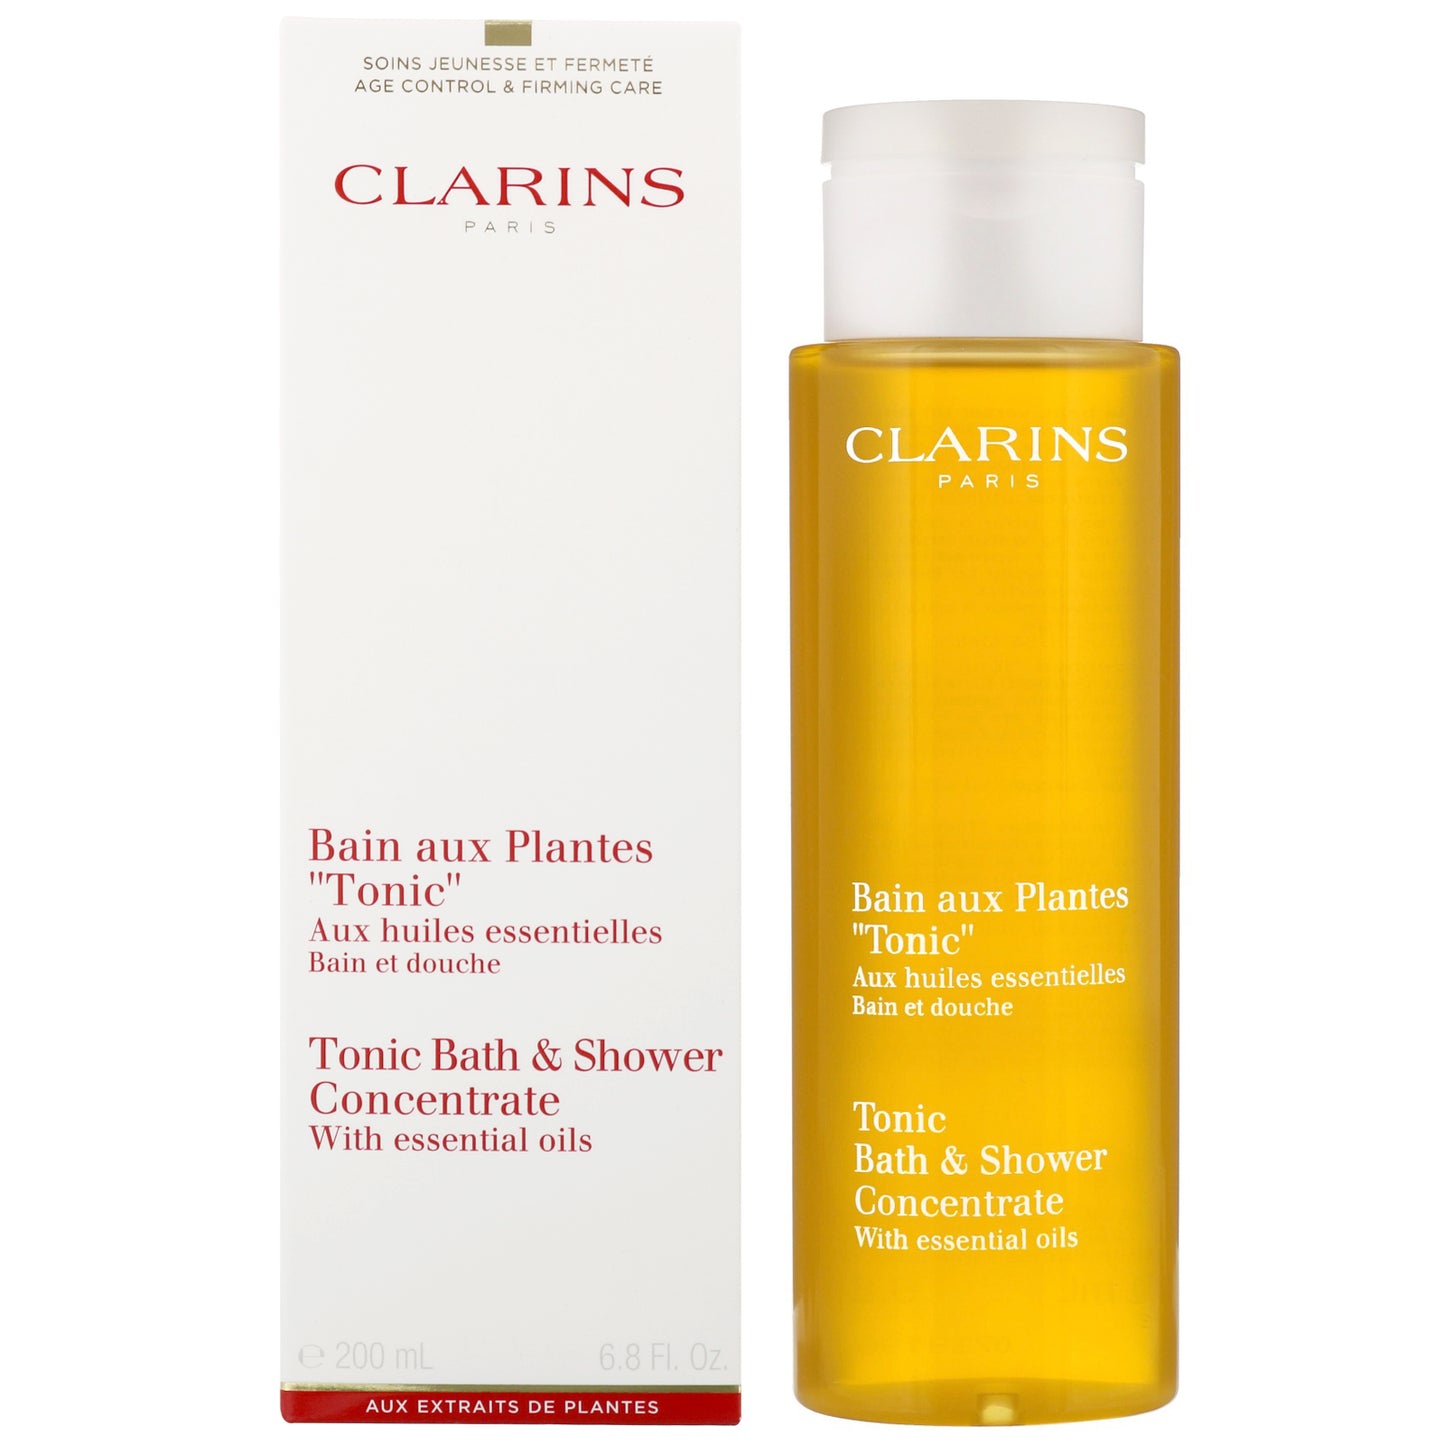 Clarins Bath & Shower Tonic Concentrate Gel